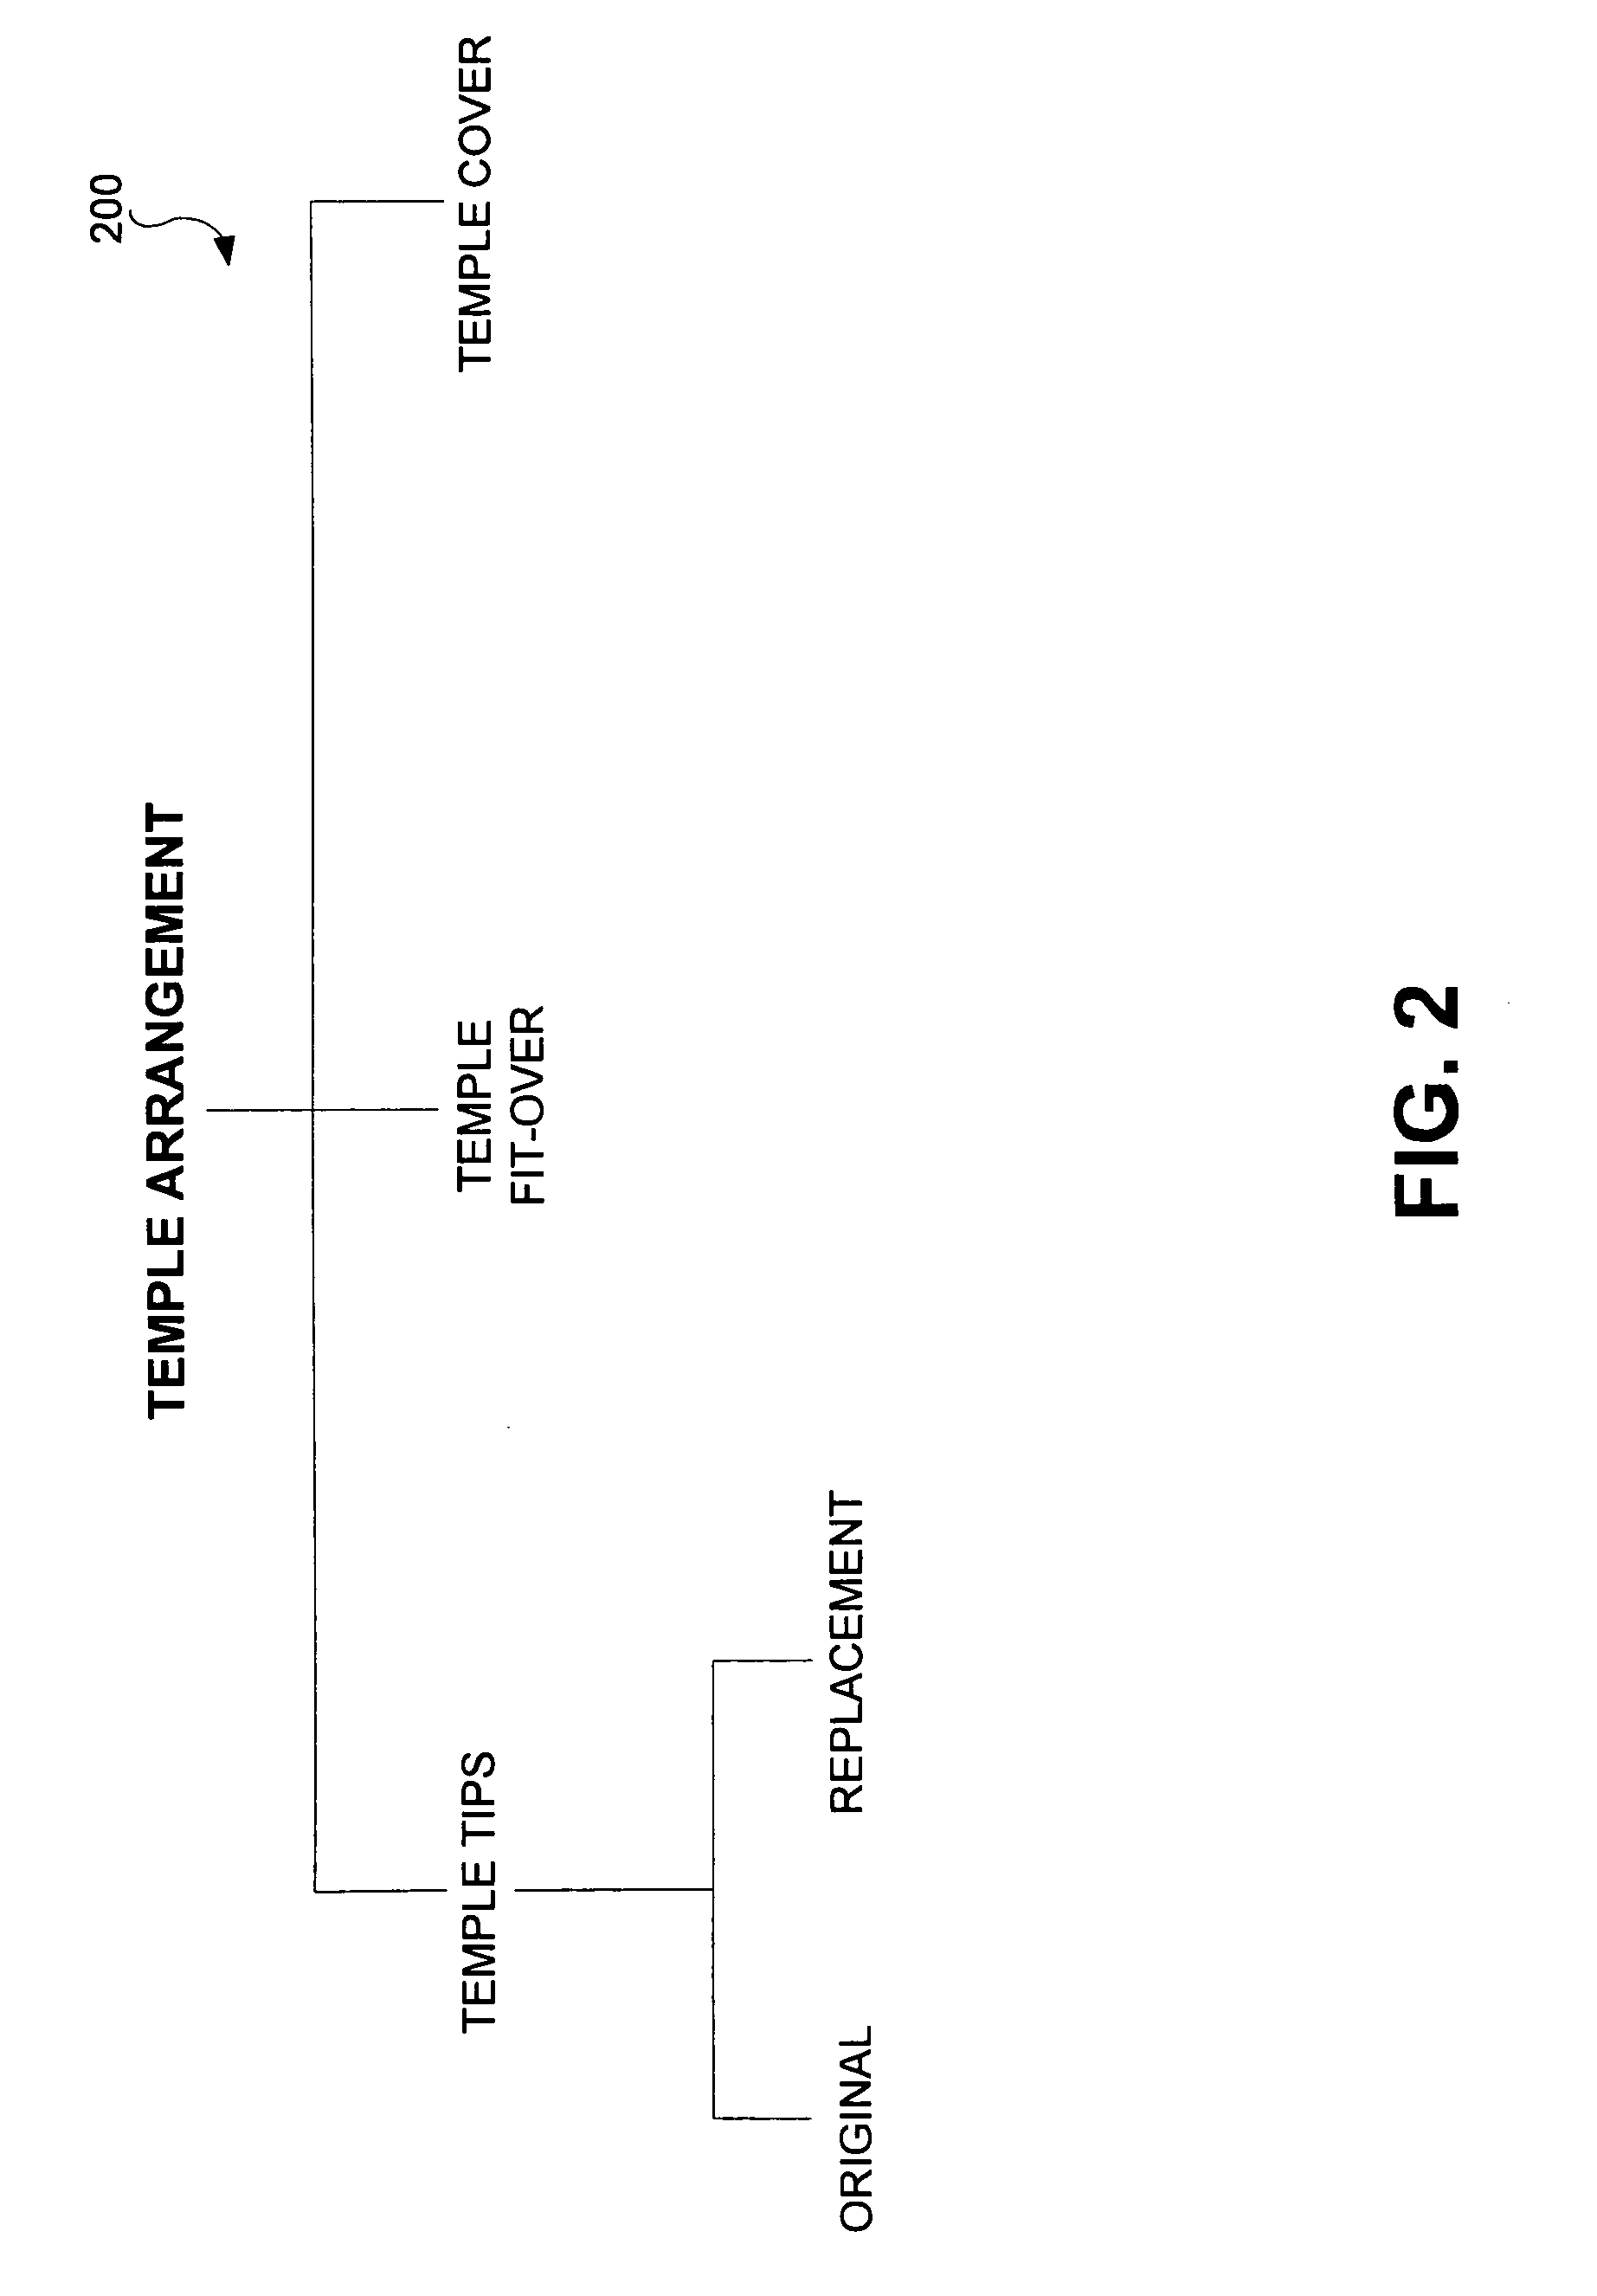 Eyewear supporting electrical components and apparatus therefor